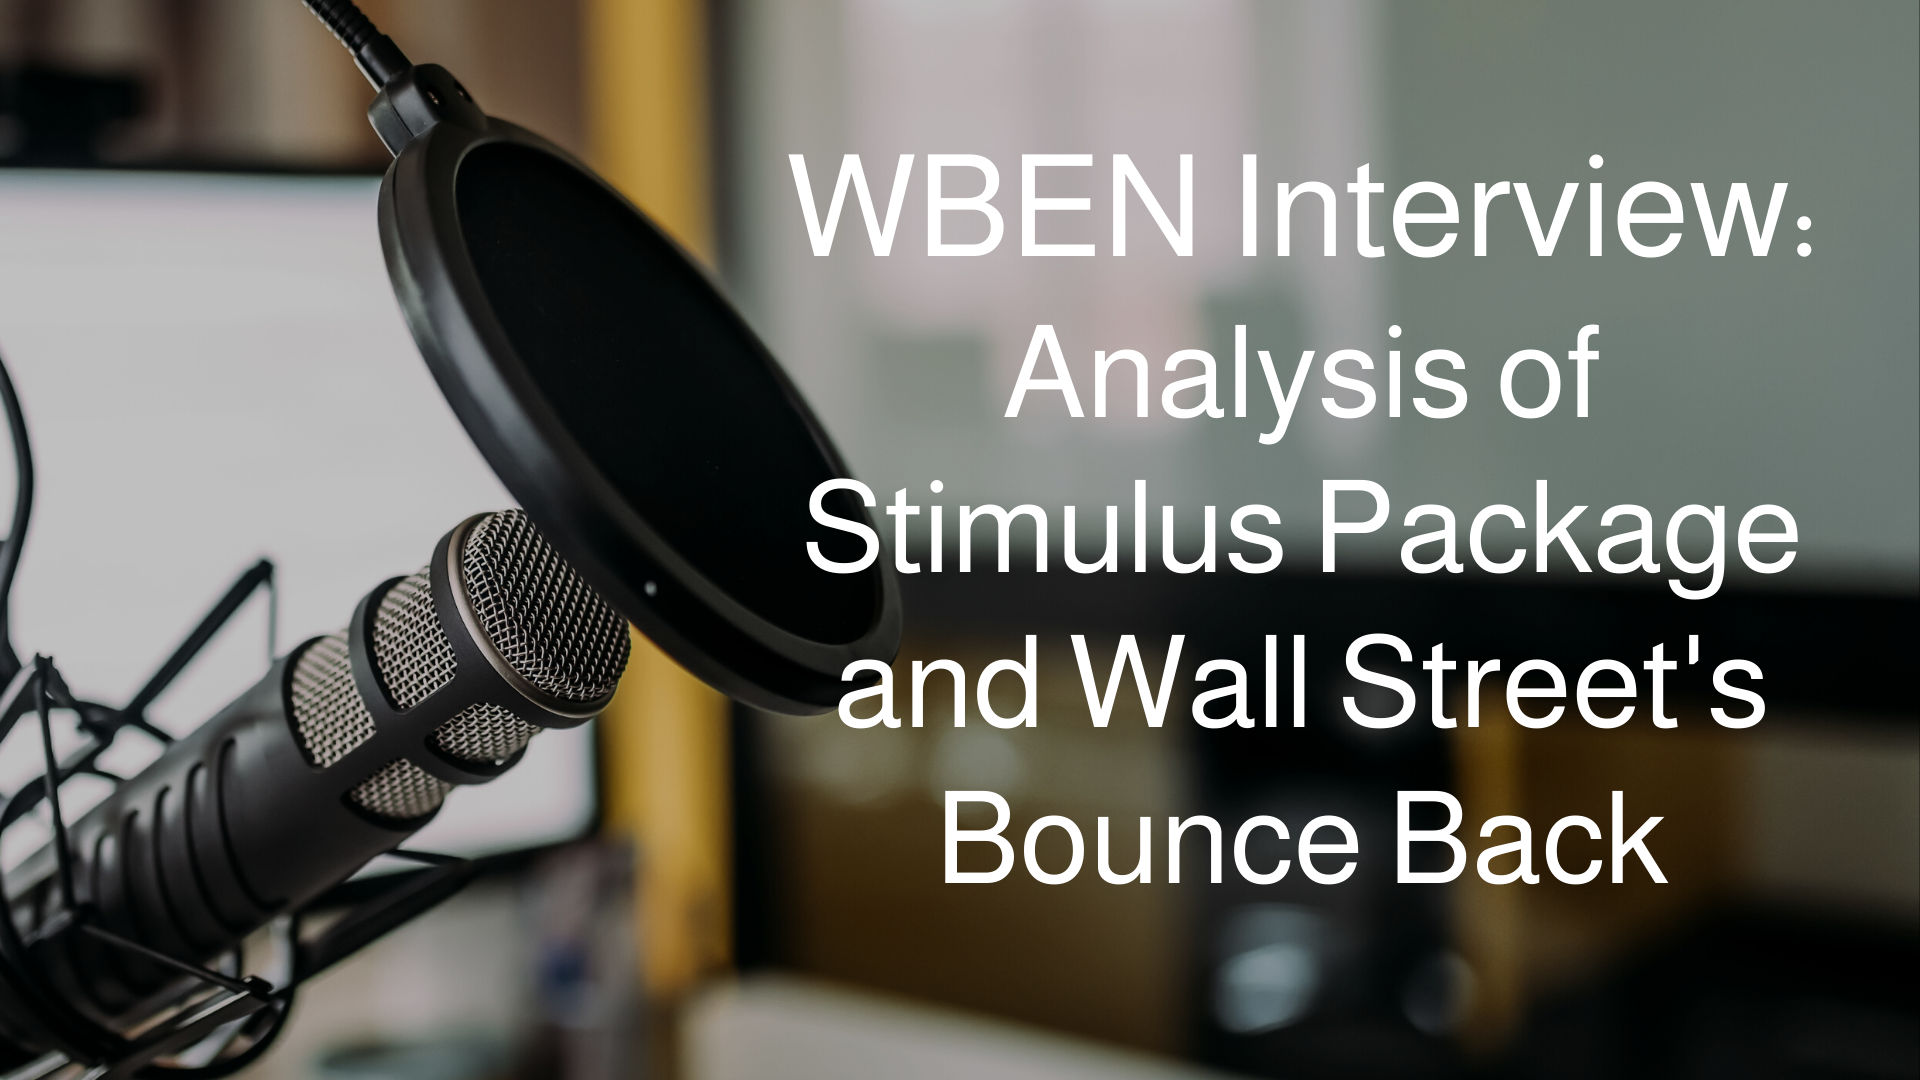 WBEN Interview: Analysis of Stimulus Package and Wall Street’s Bounce Back